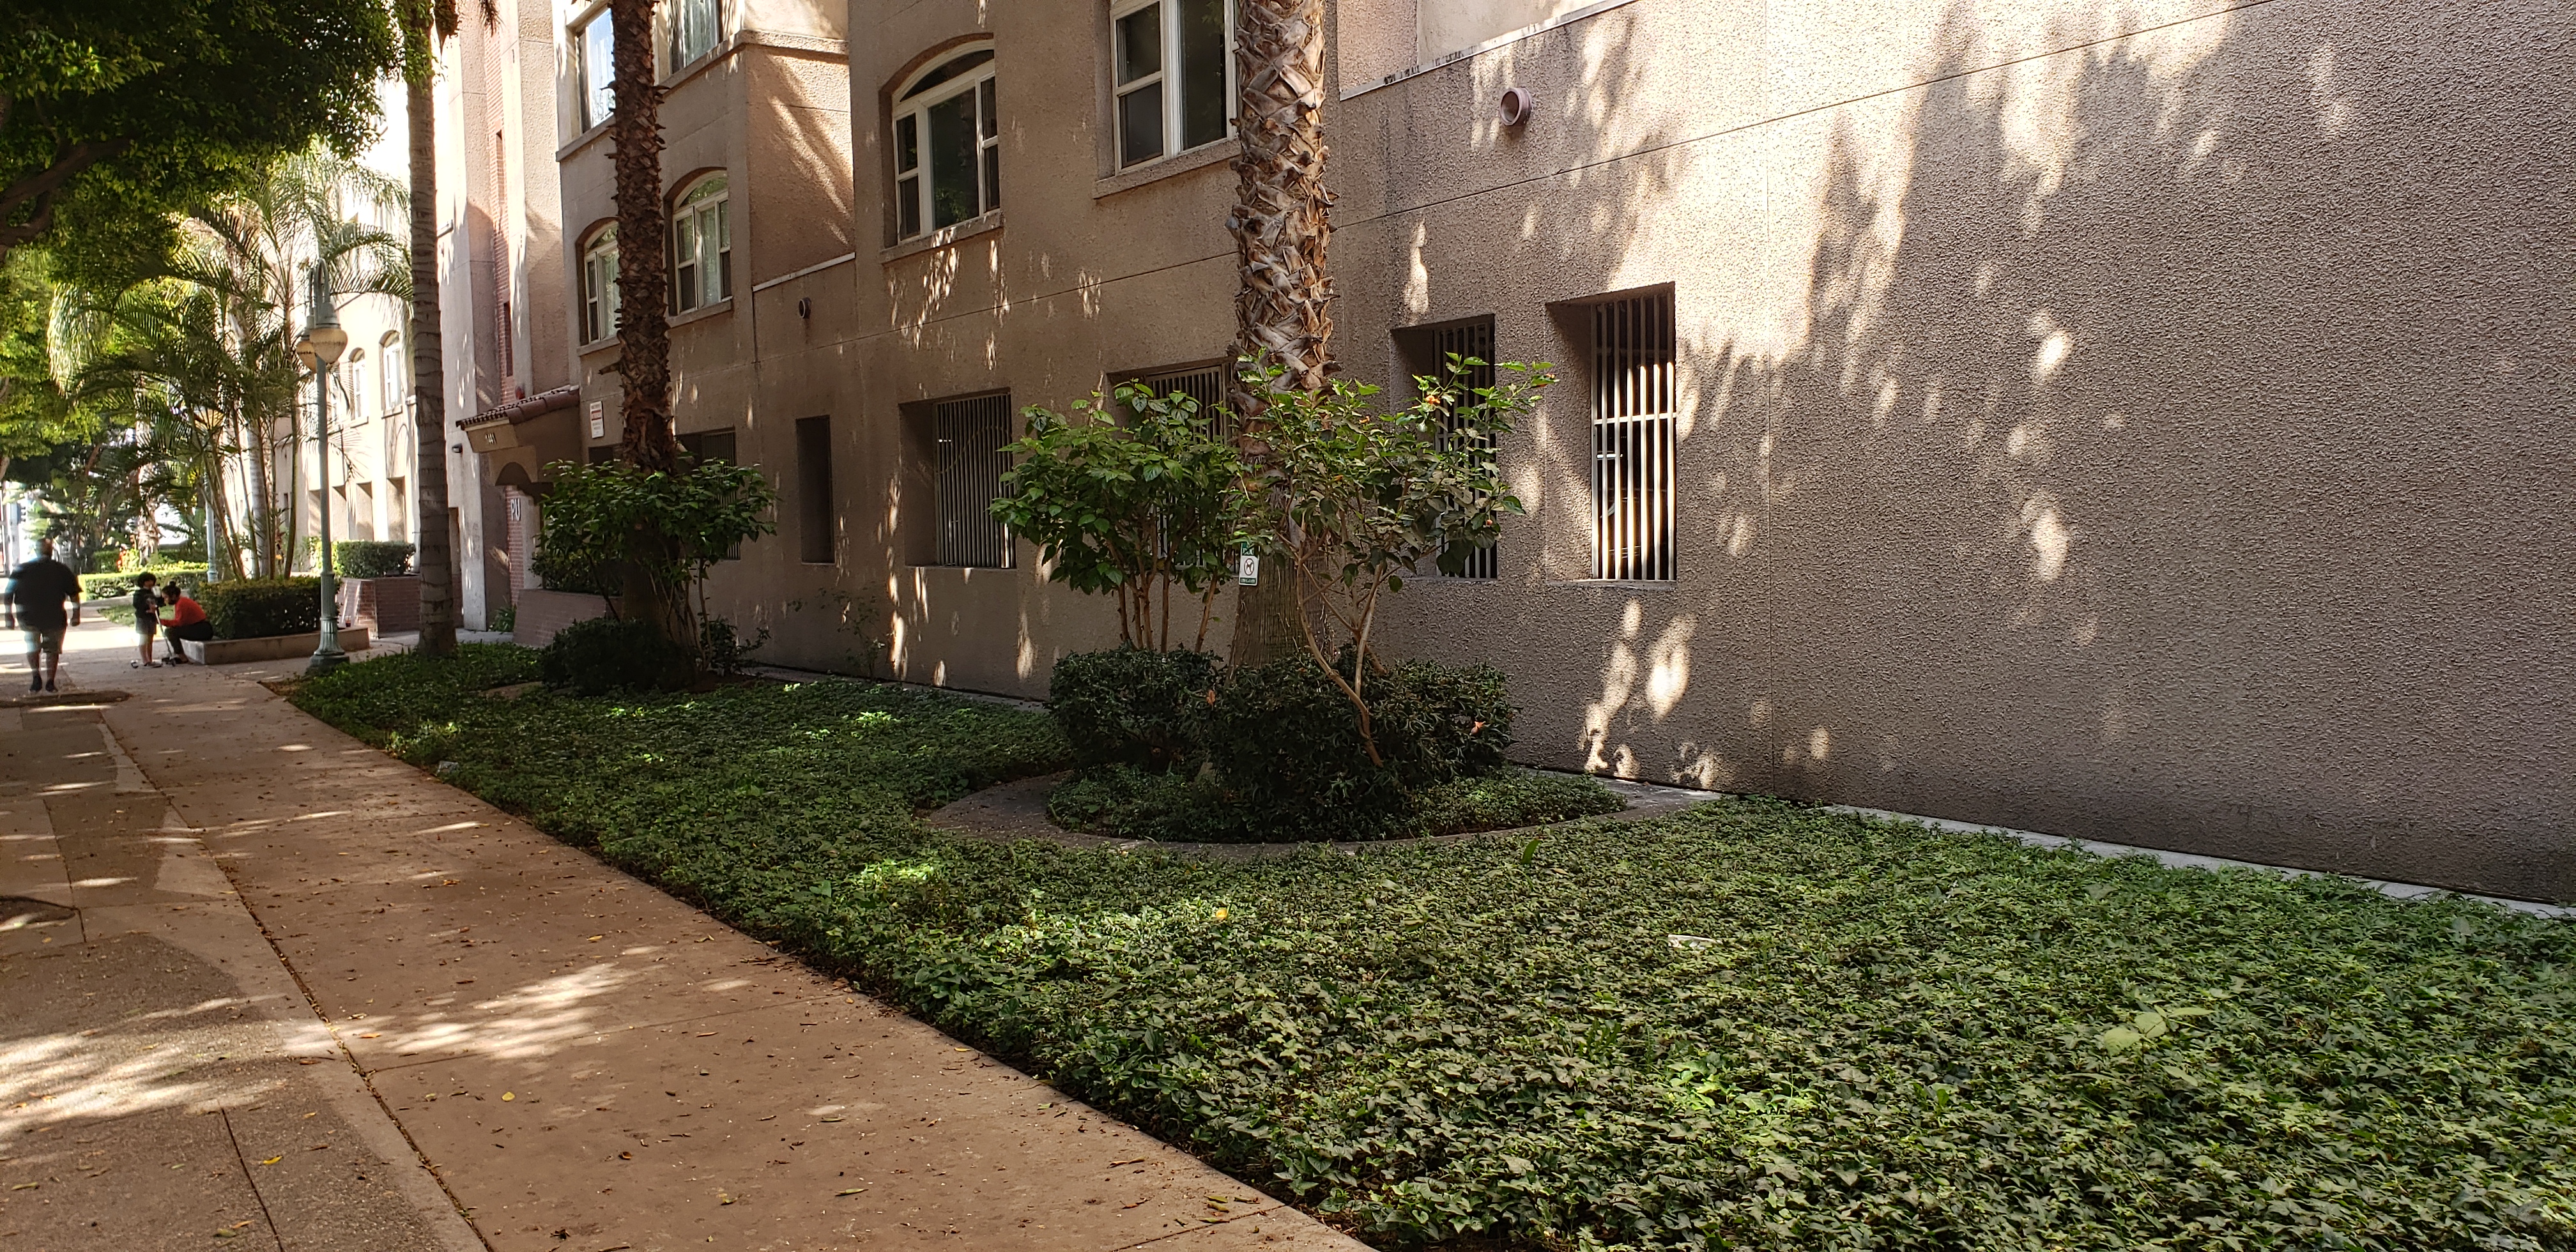 View of a side of a building that has plants and trees along the front and then a sidewalk.